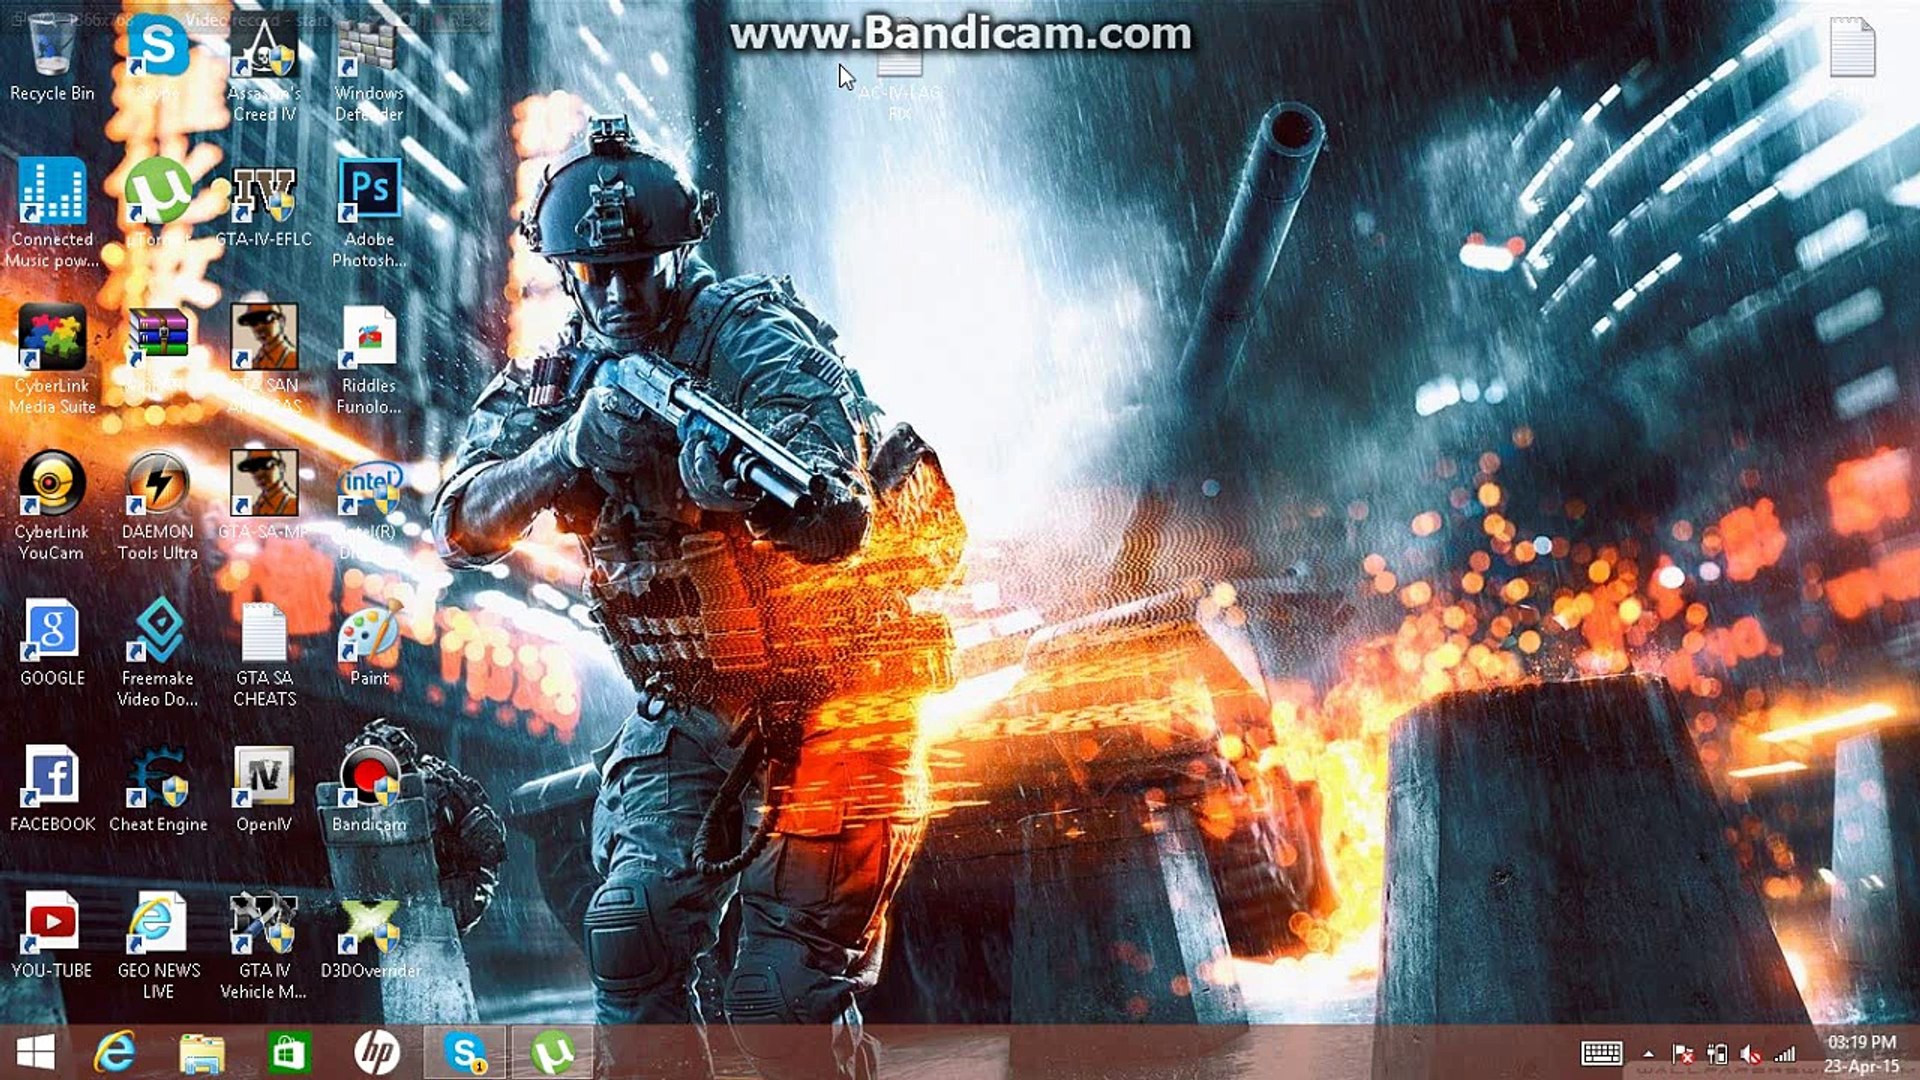 Install Battlefield 4 Crack - PS4 - video Dailymotion